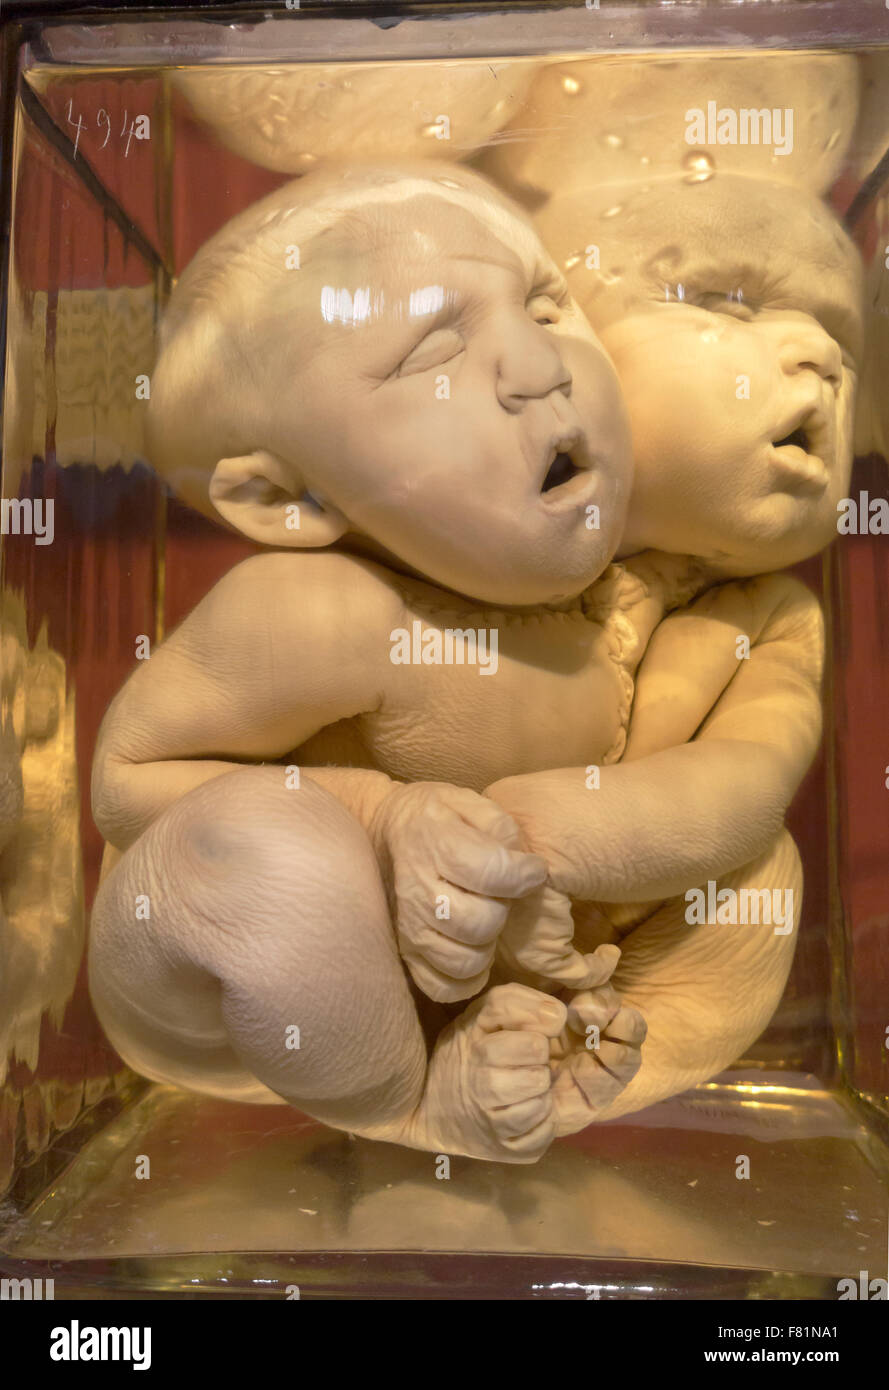 Conjoined twins, separate upper parts, preserved in formalin jar.  Medical Museion in Copenhagen. Stock Photo